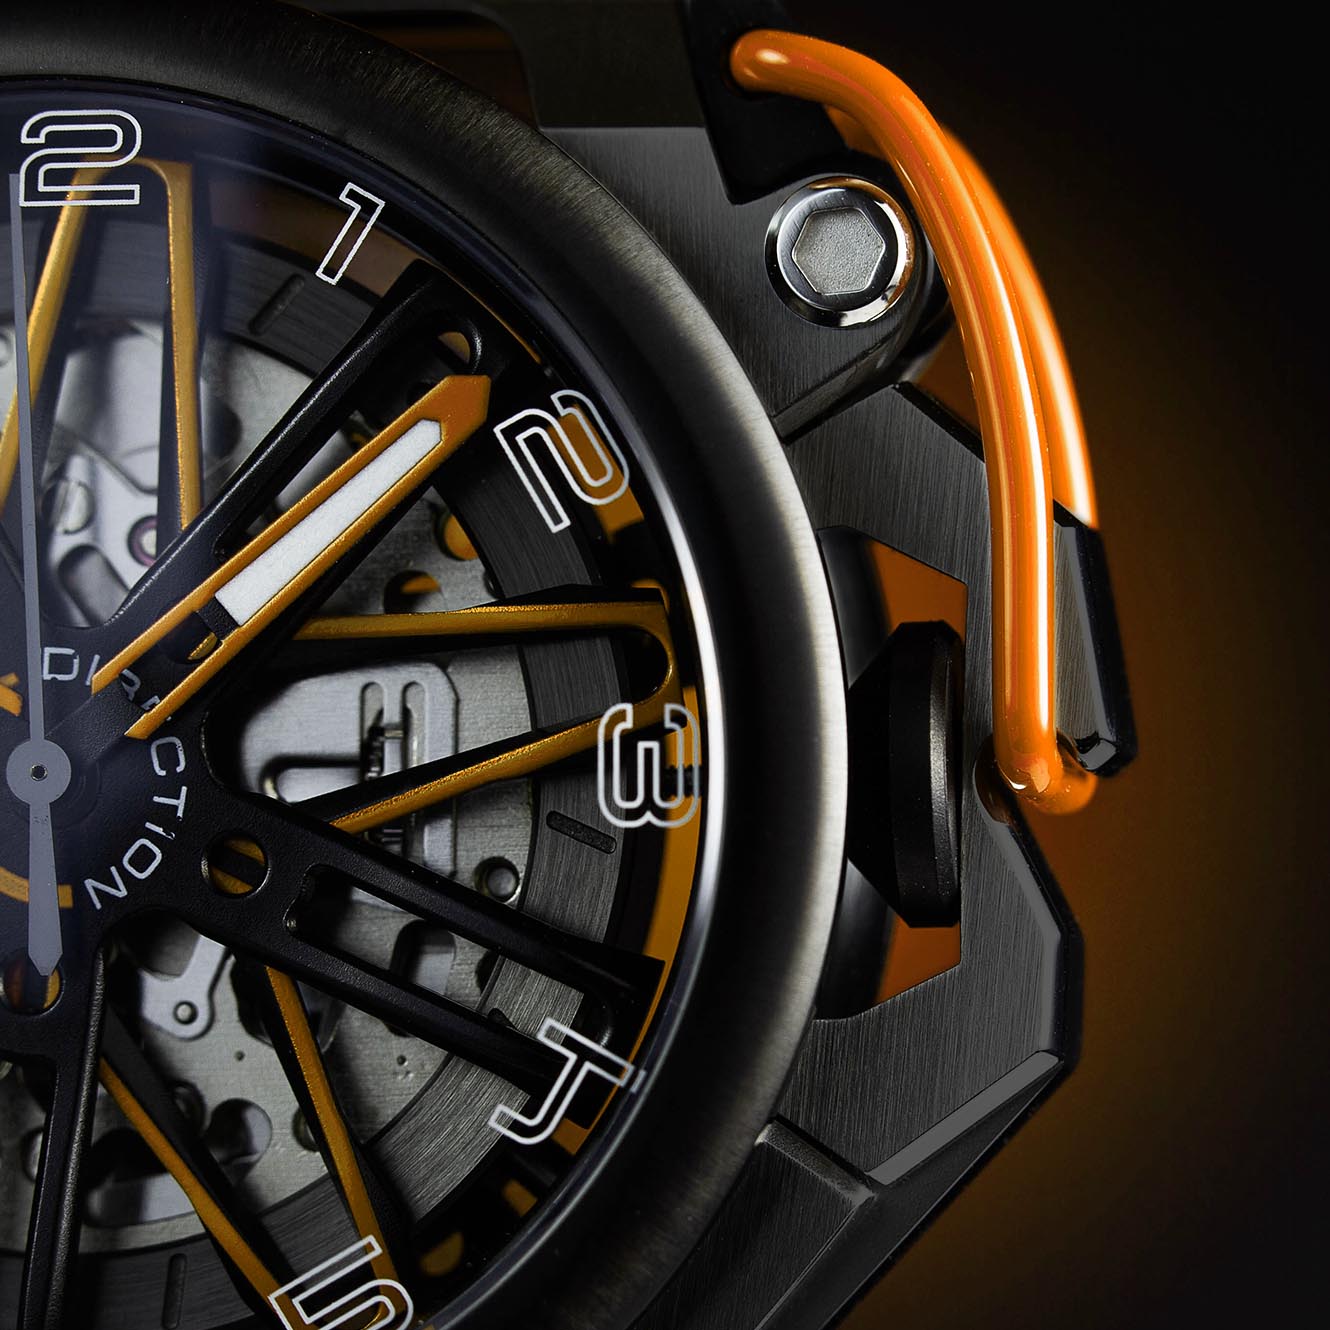 RIM GT Ø42mm in orange and green | Mens Luxury Watches | Italian Designed Watches